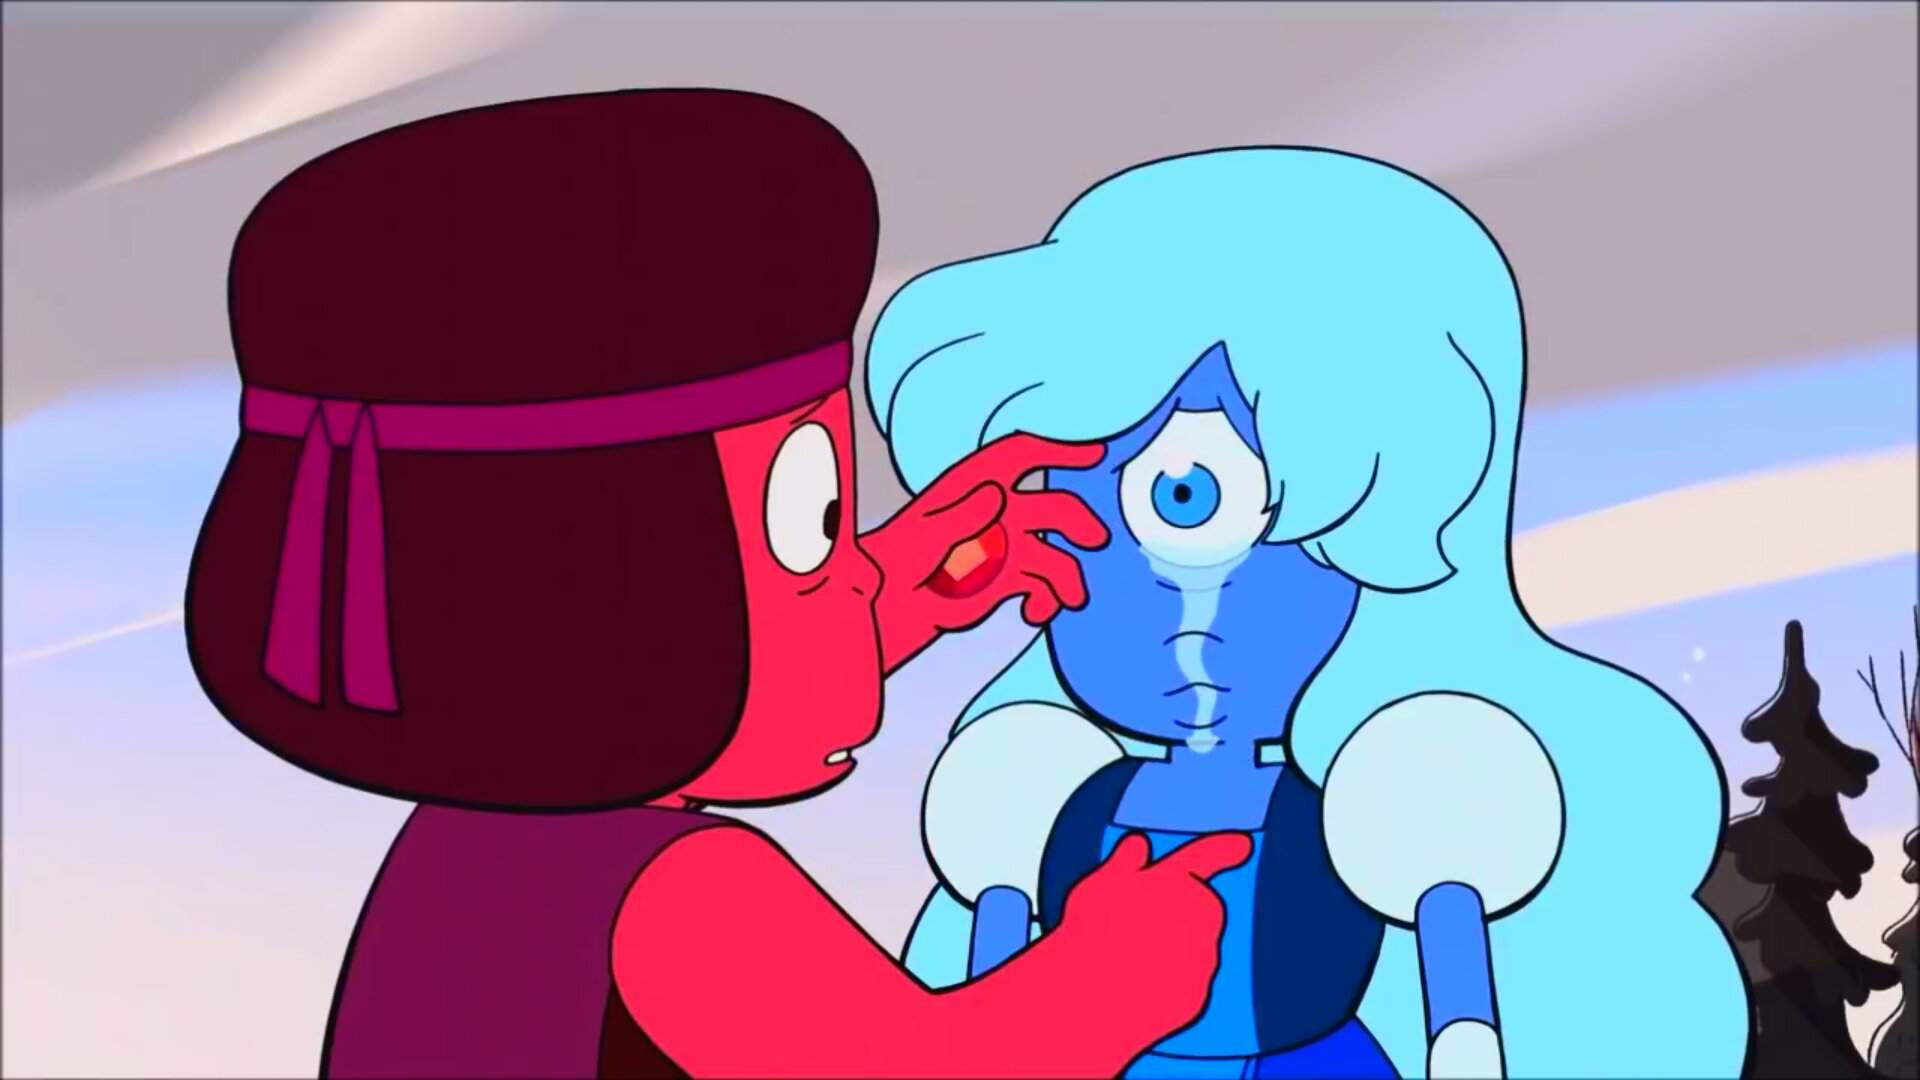 The reason Ruby and Sapphire are getting married